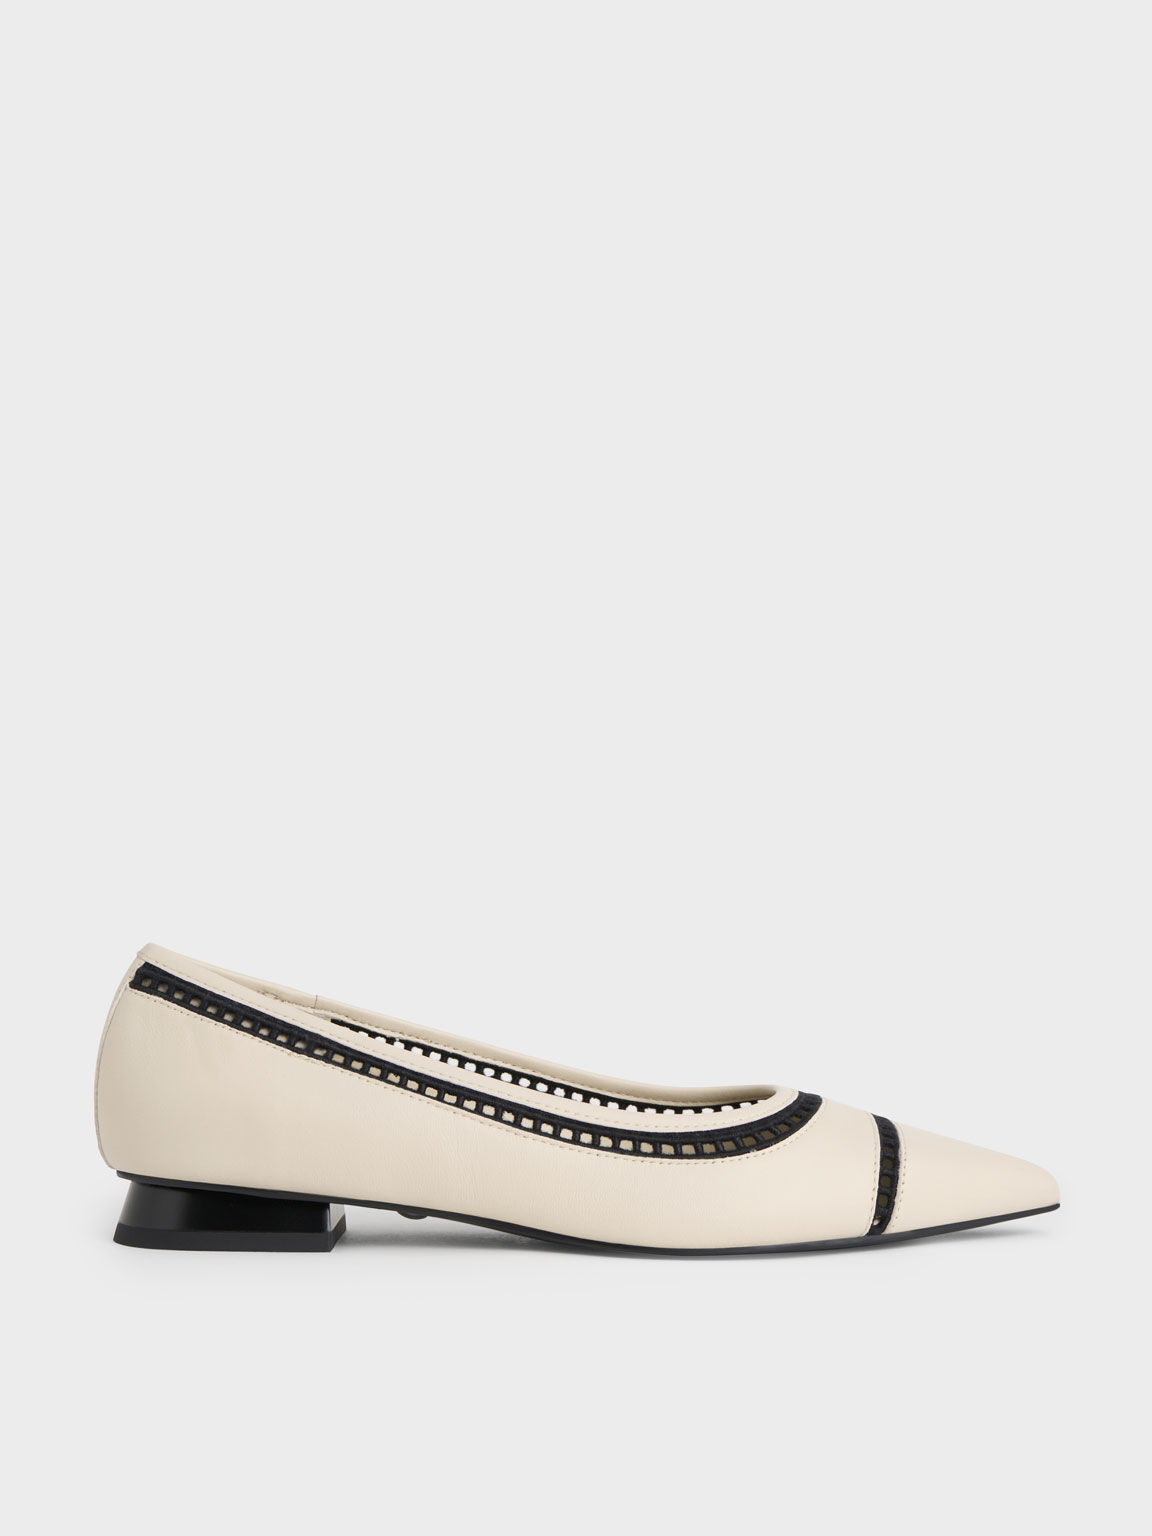 Charles & Keith Classic Ballet Flats brown elegant Shoes Ballerinas 